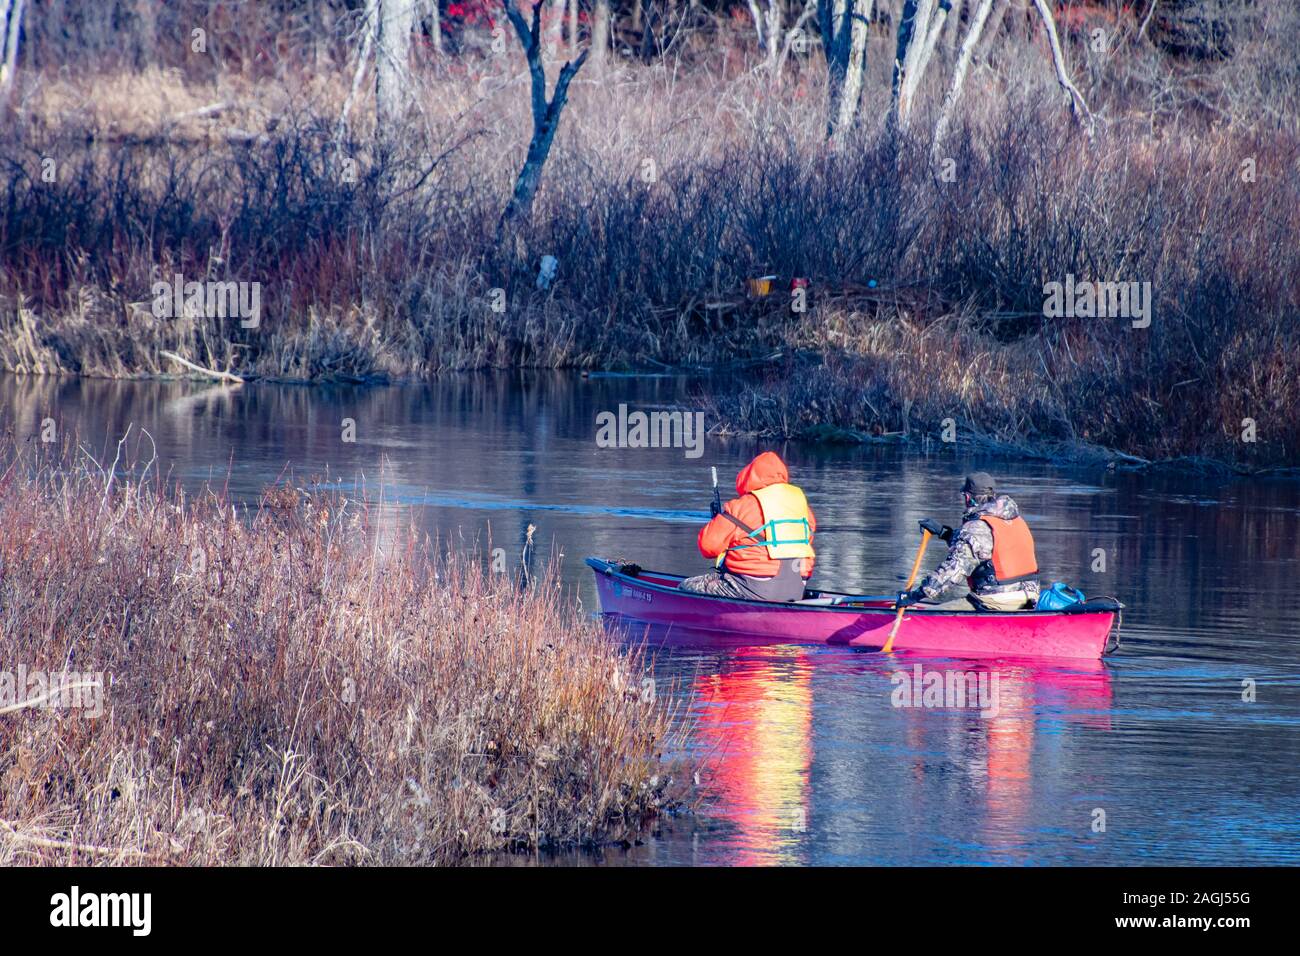 Two male duck hunters paddling a canoe in the Sacandaga River near Speculator, NY USA in the Adirondack Mountains in early winter Stock Photo